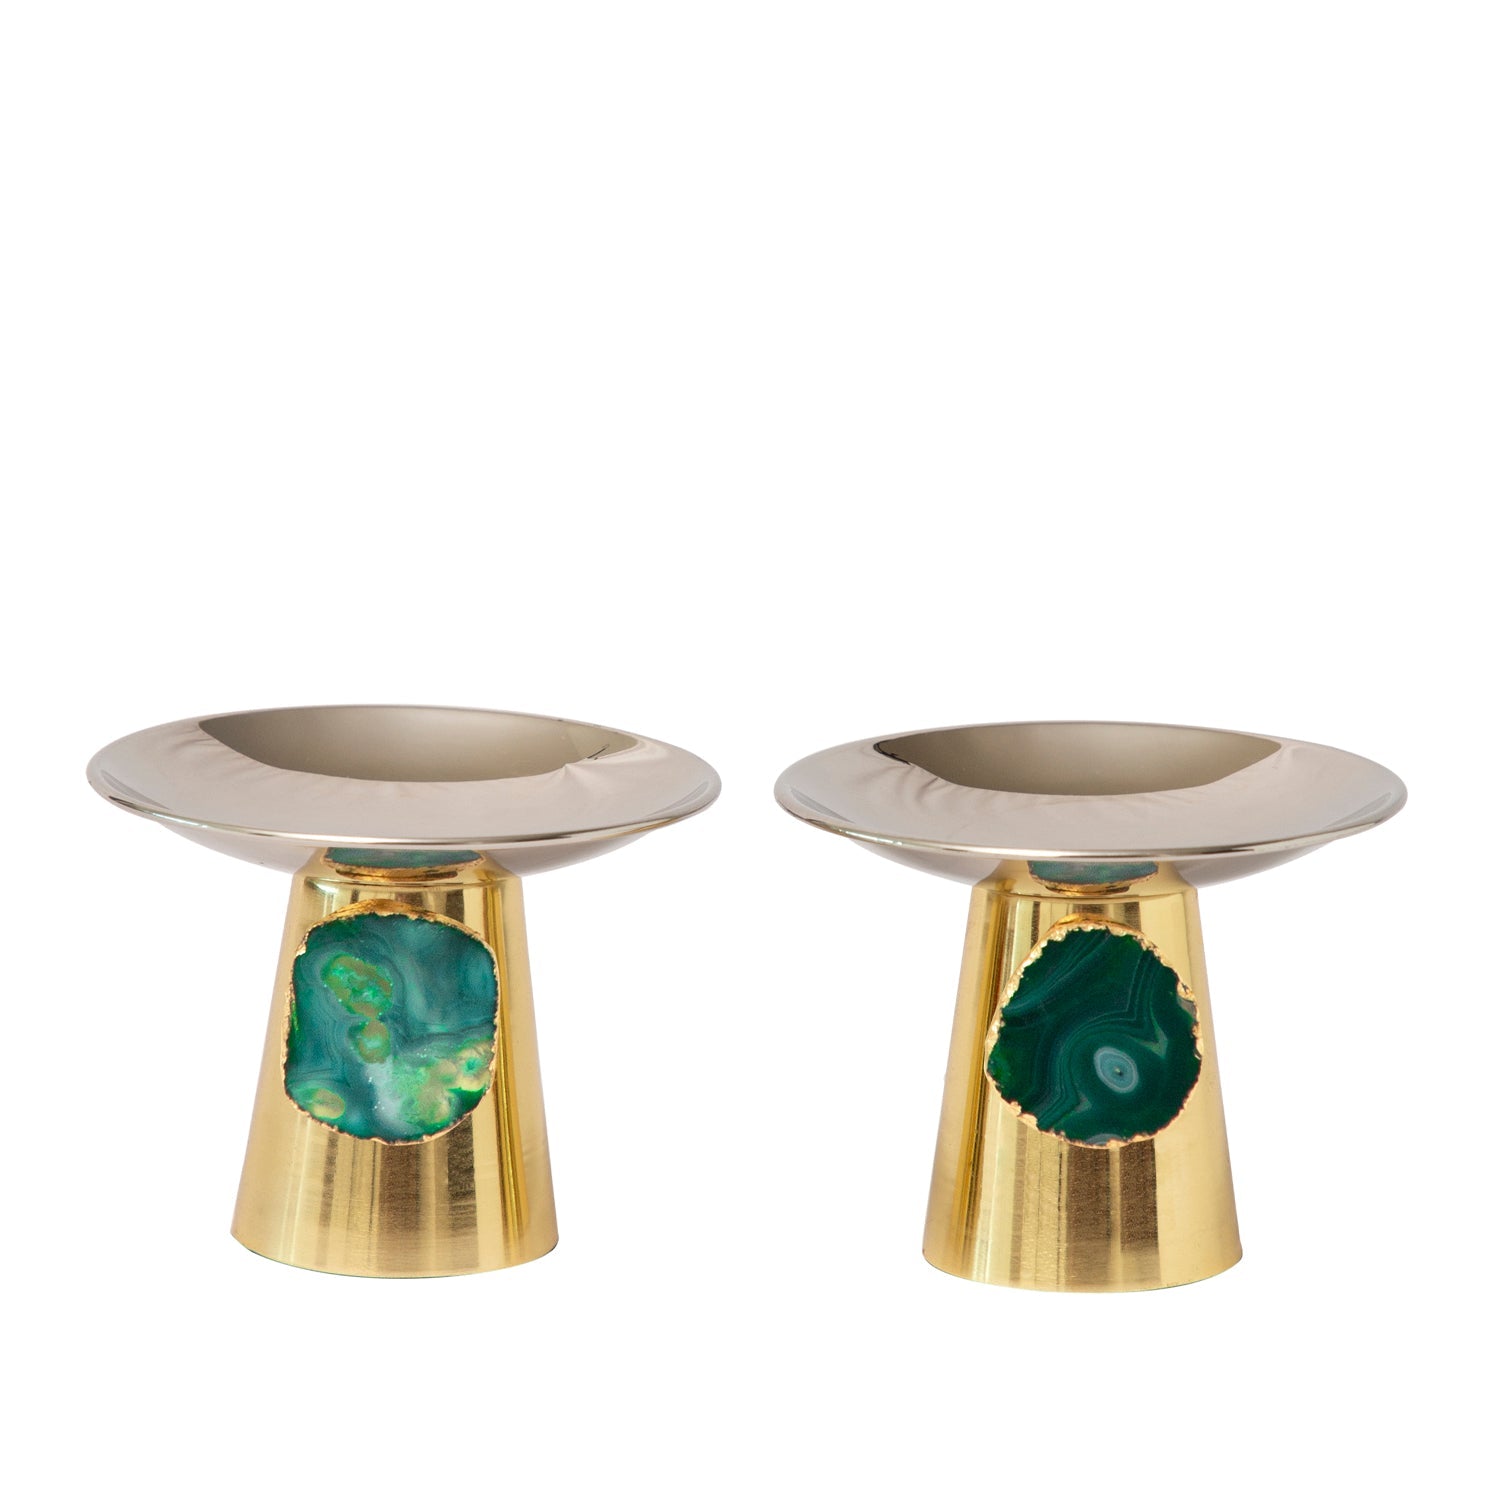 Stainless Steel Platters /Bowls With Green Agate Stone-Set of 2